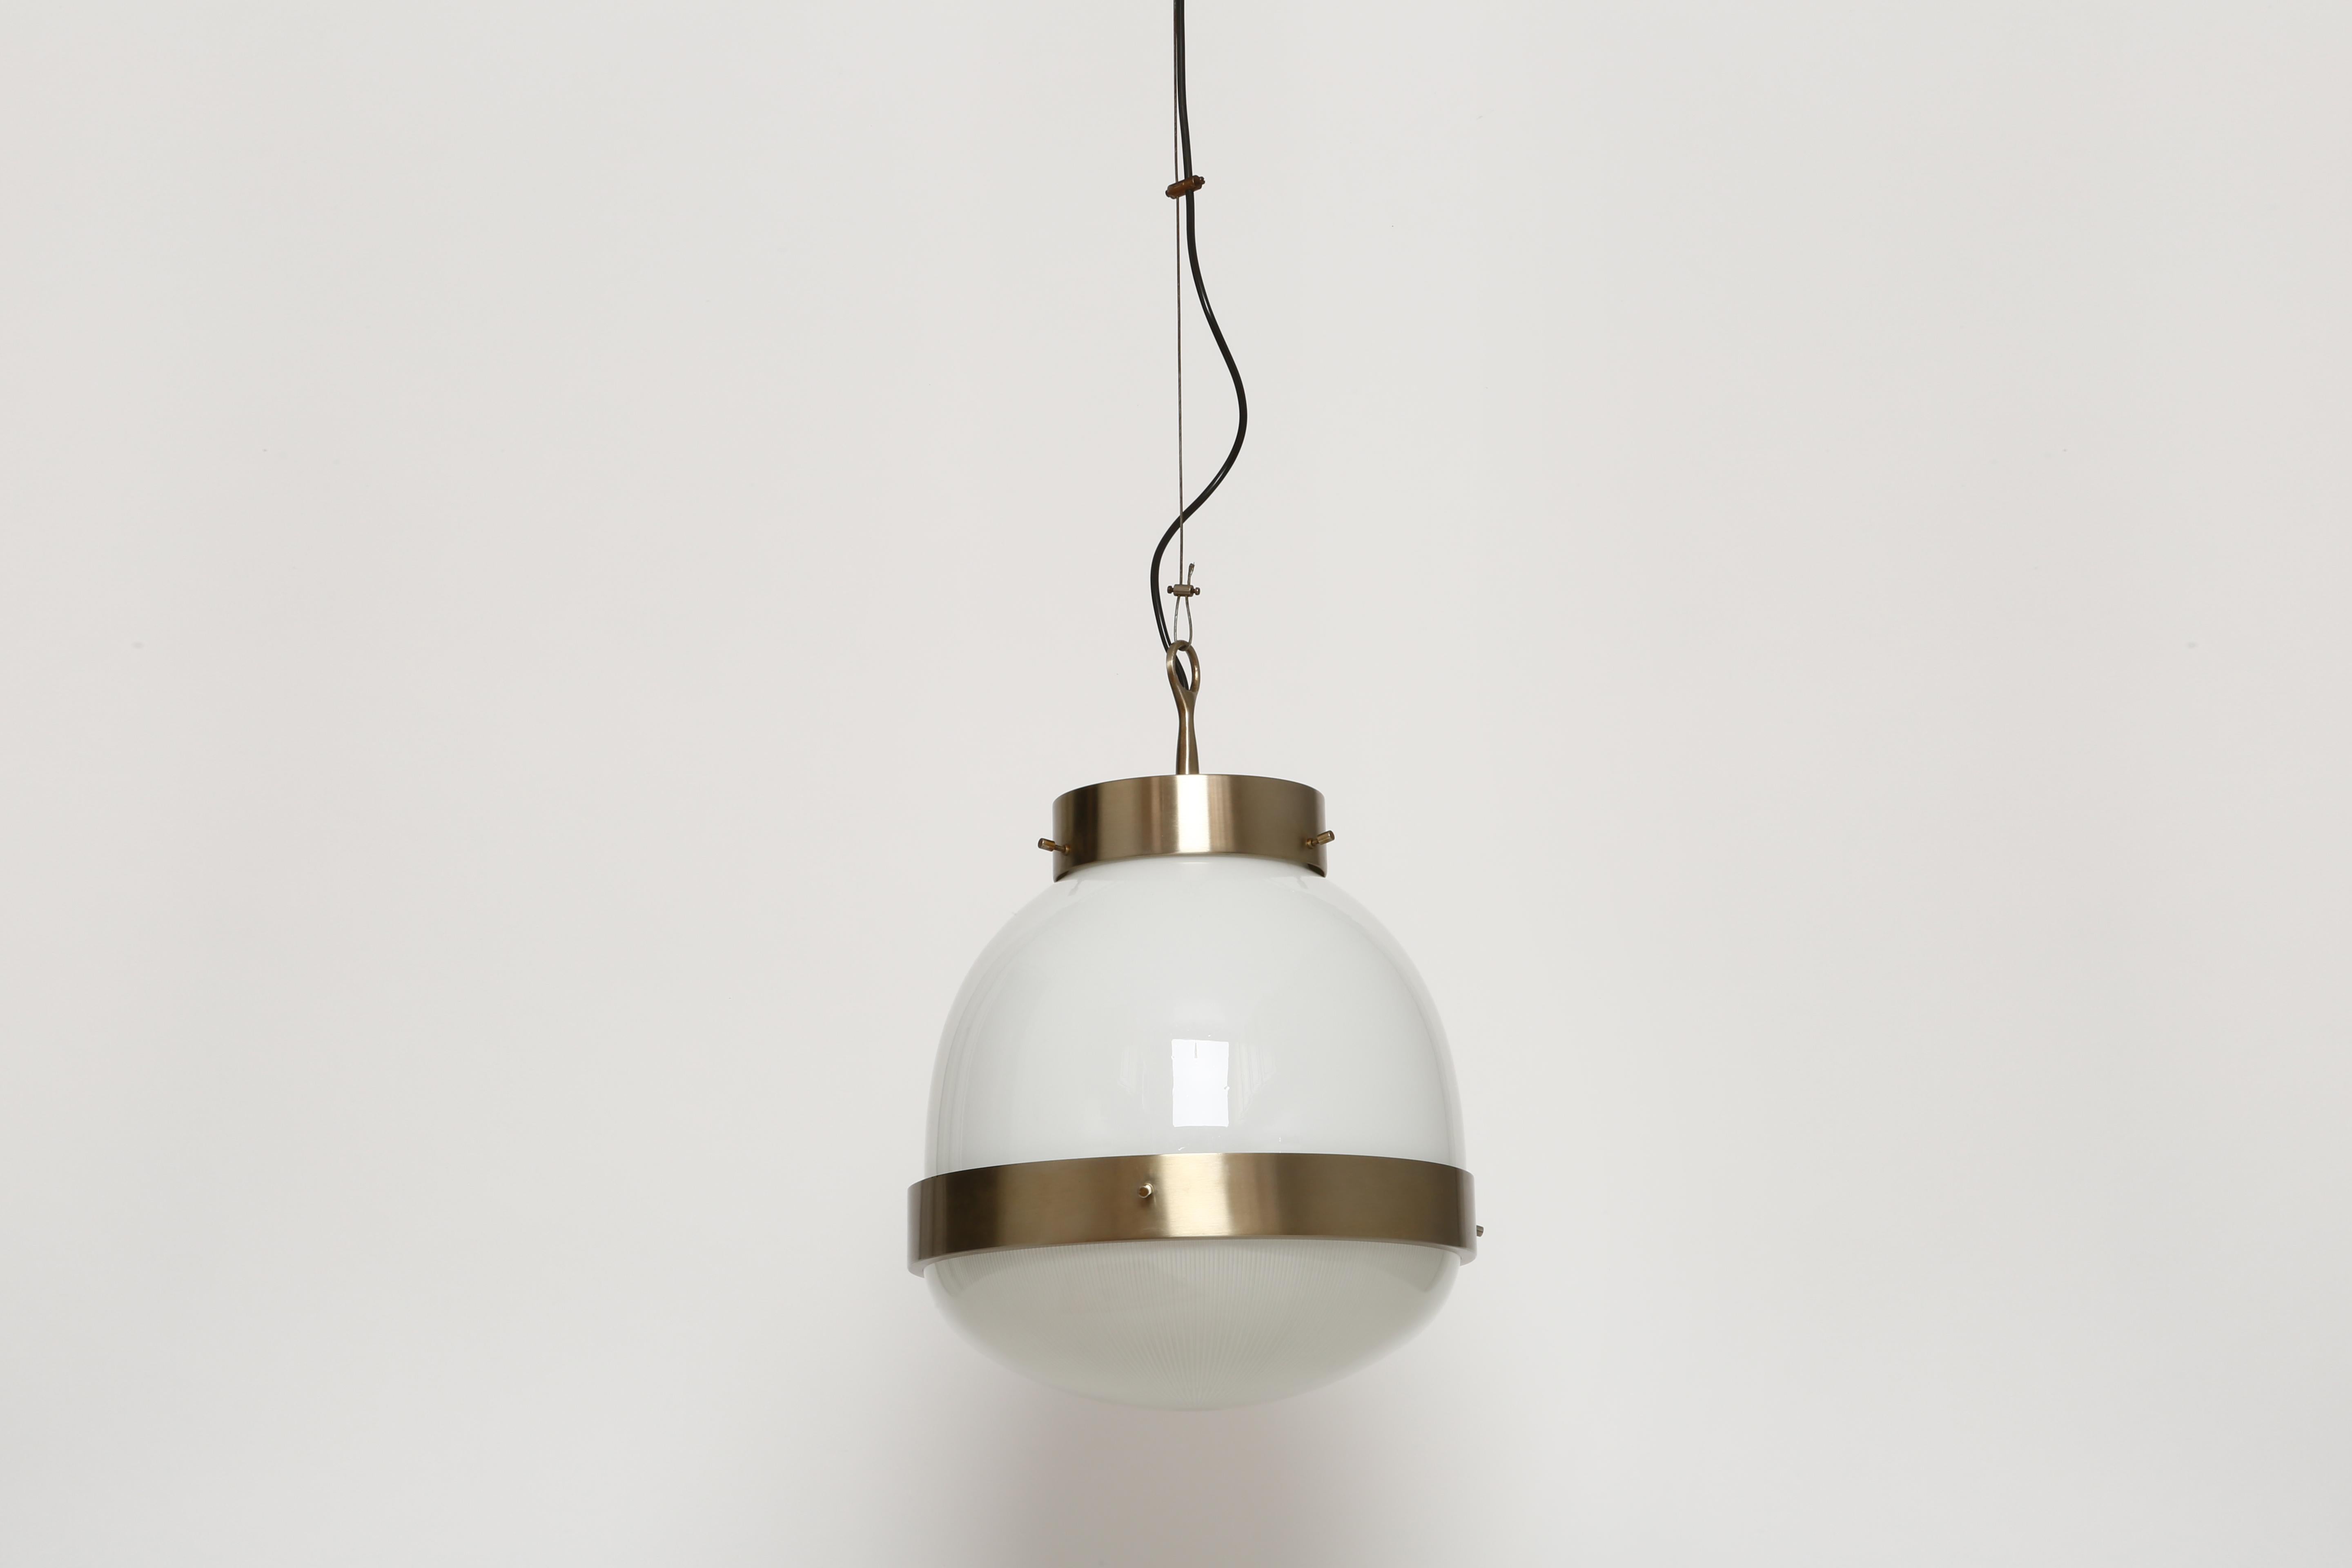 Sergio Mazza ceiling pendant Delta, large.
Textured glass, opaline glass body and nickel-plated brass.
One medium base socket.